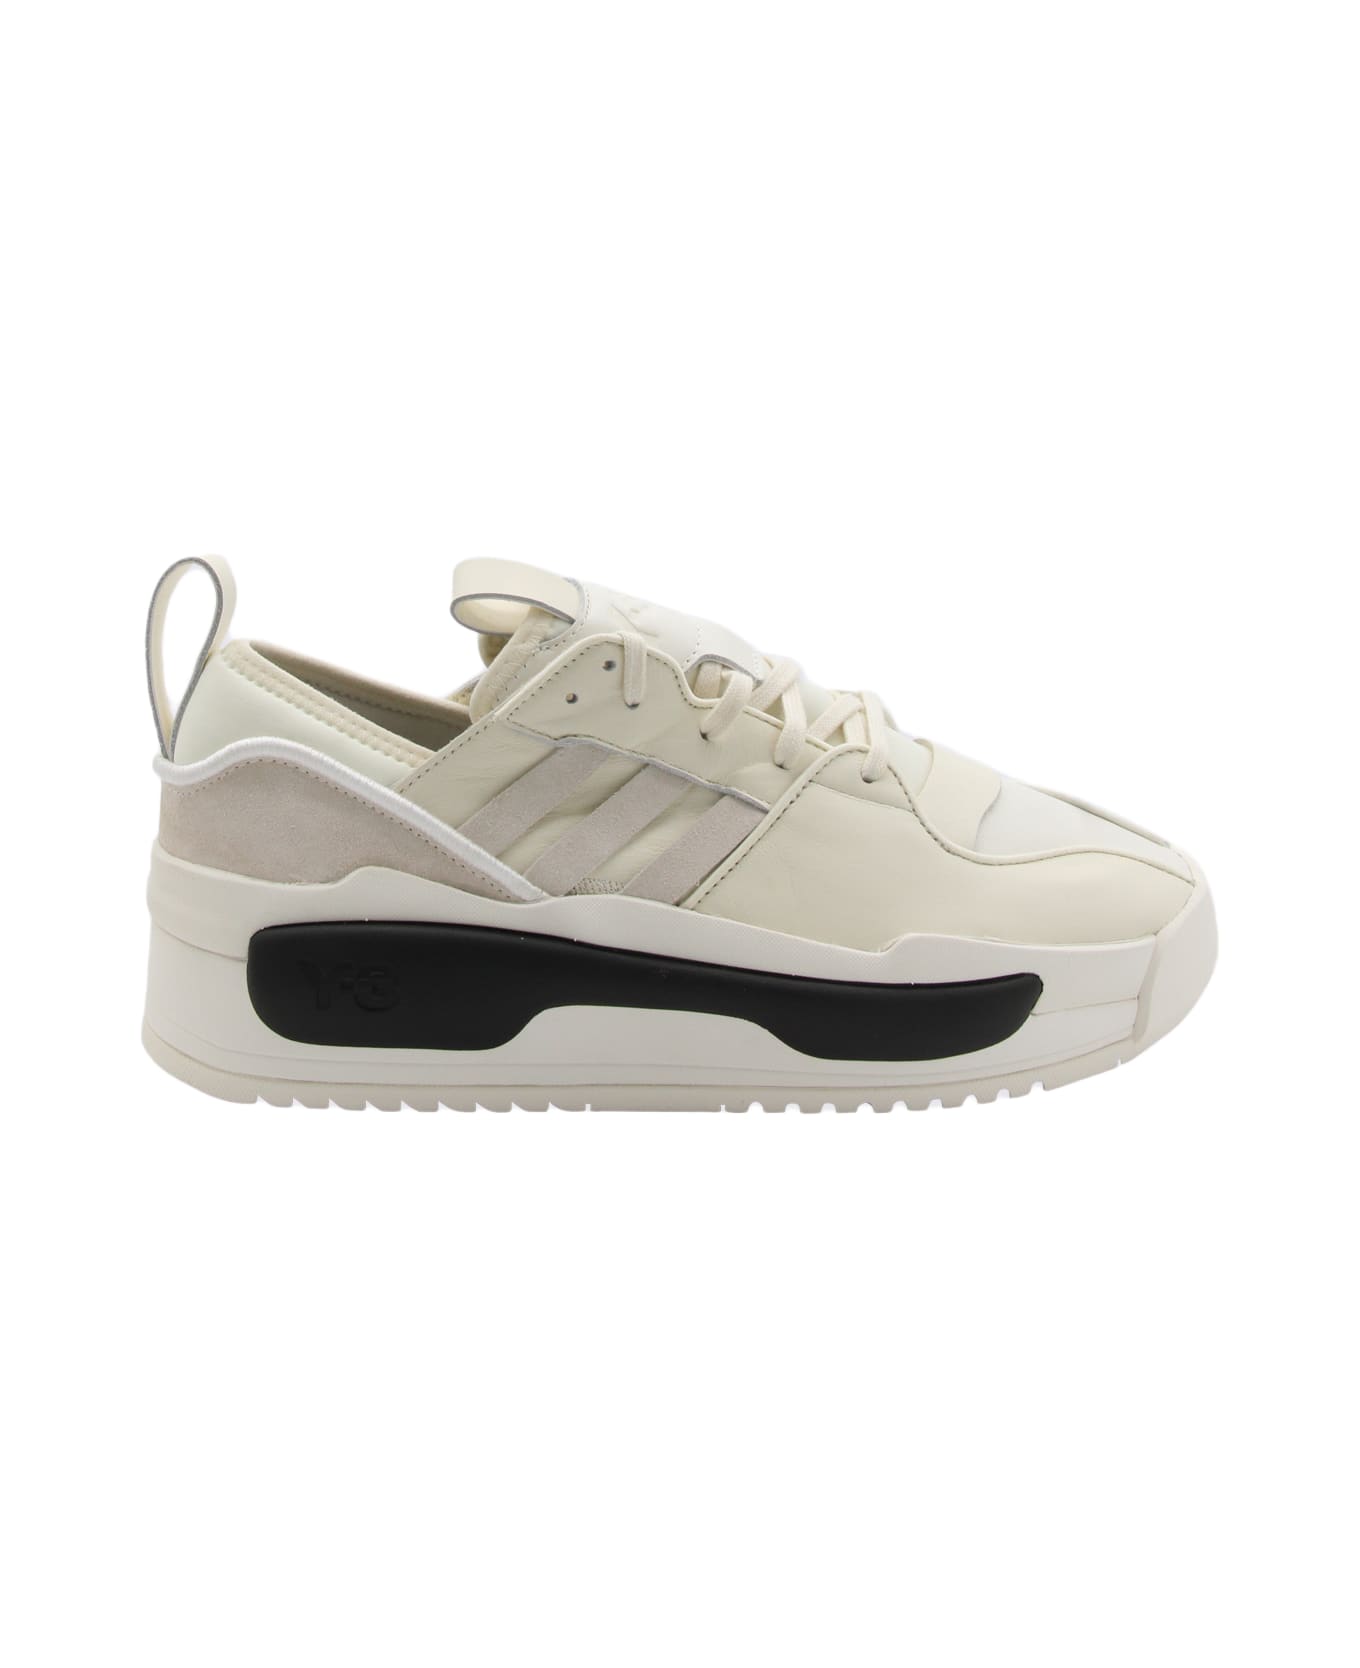 Y-3 Ivory Leather Rivalry Sneakers - CREAM WHITE/OFF WHITE/BLACK